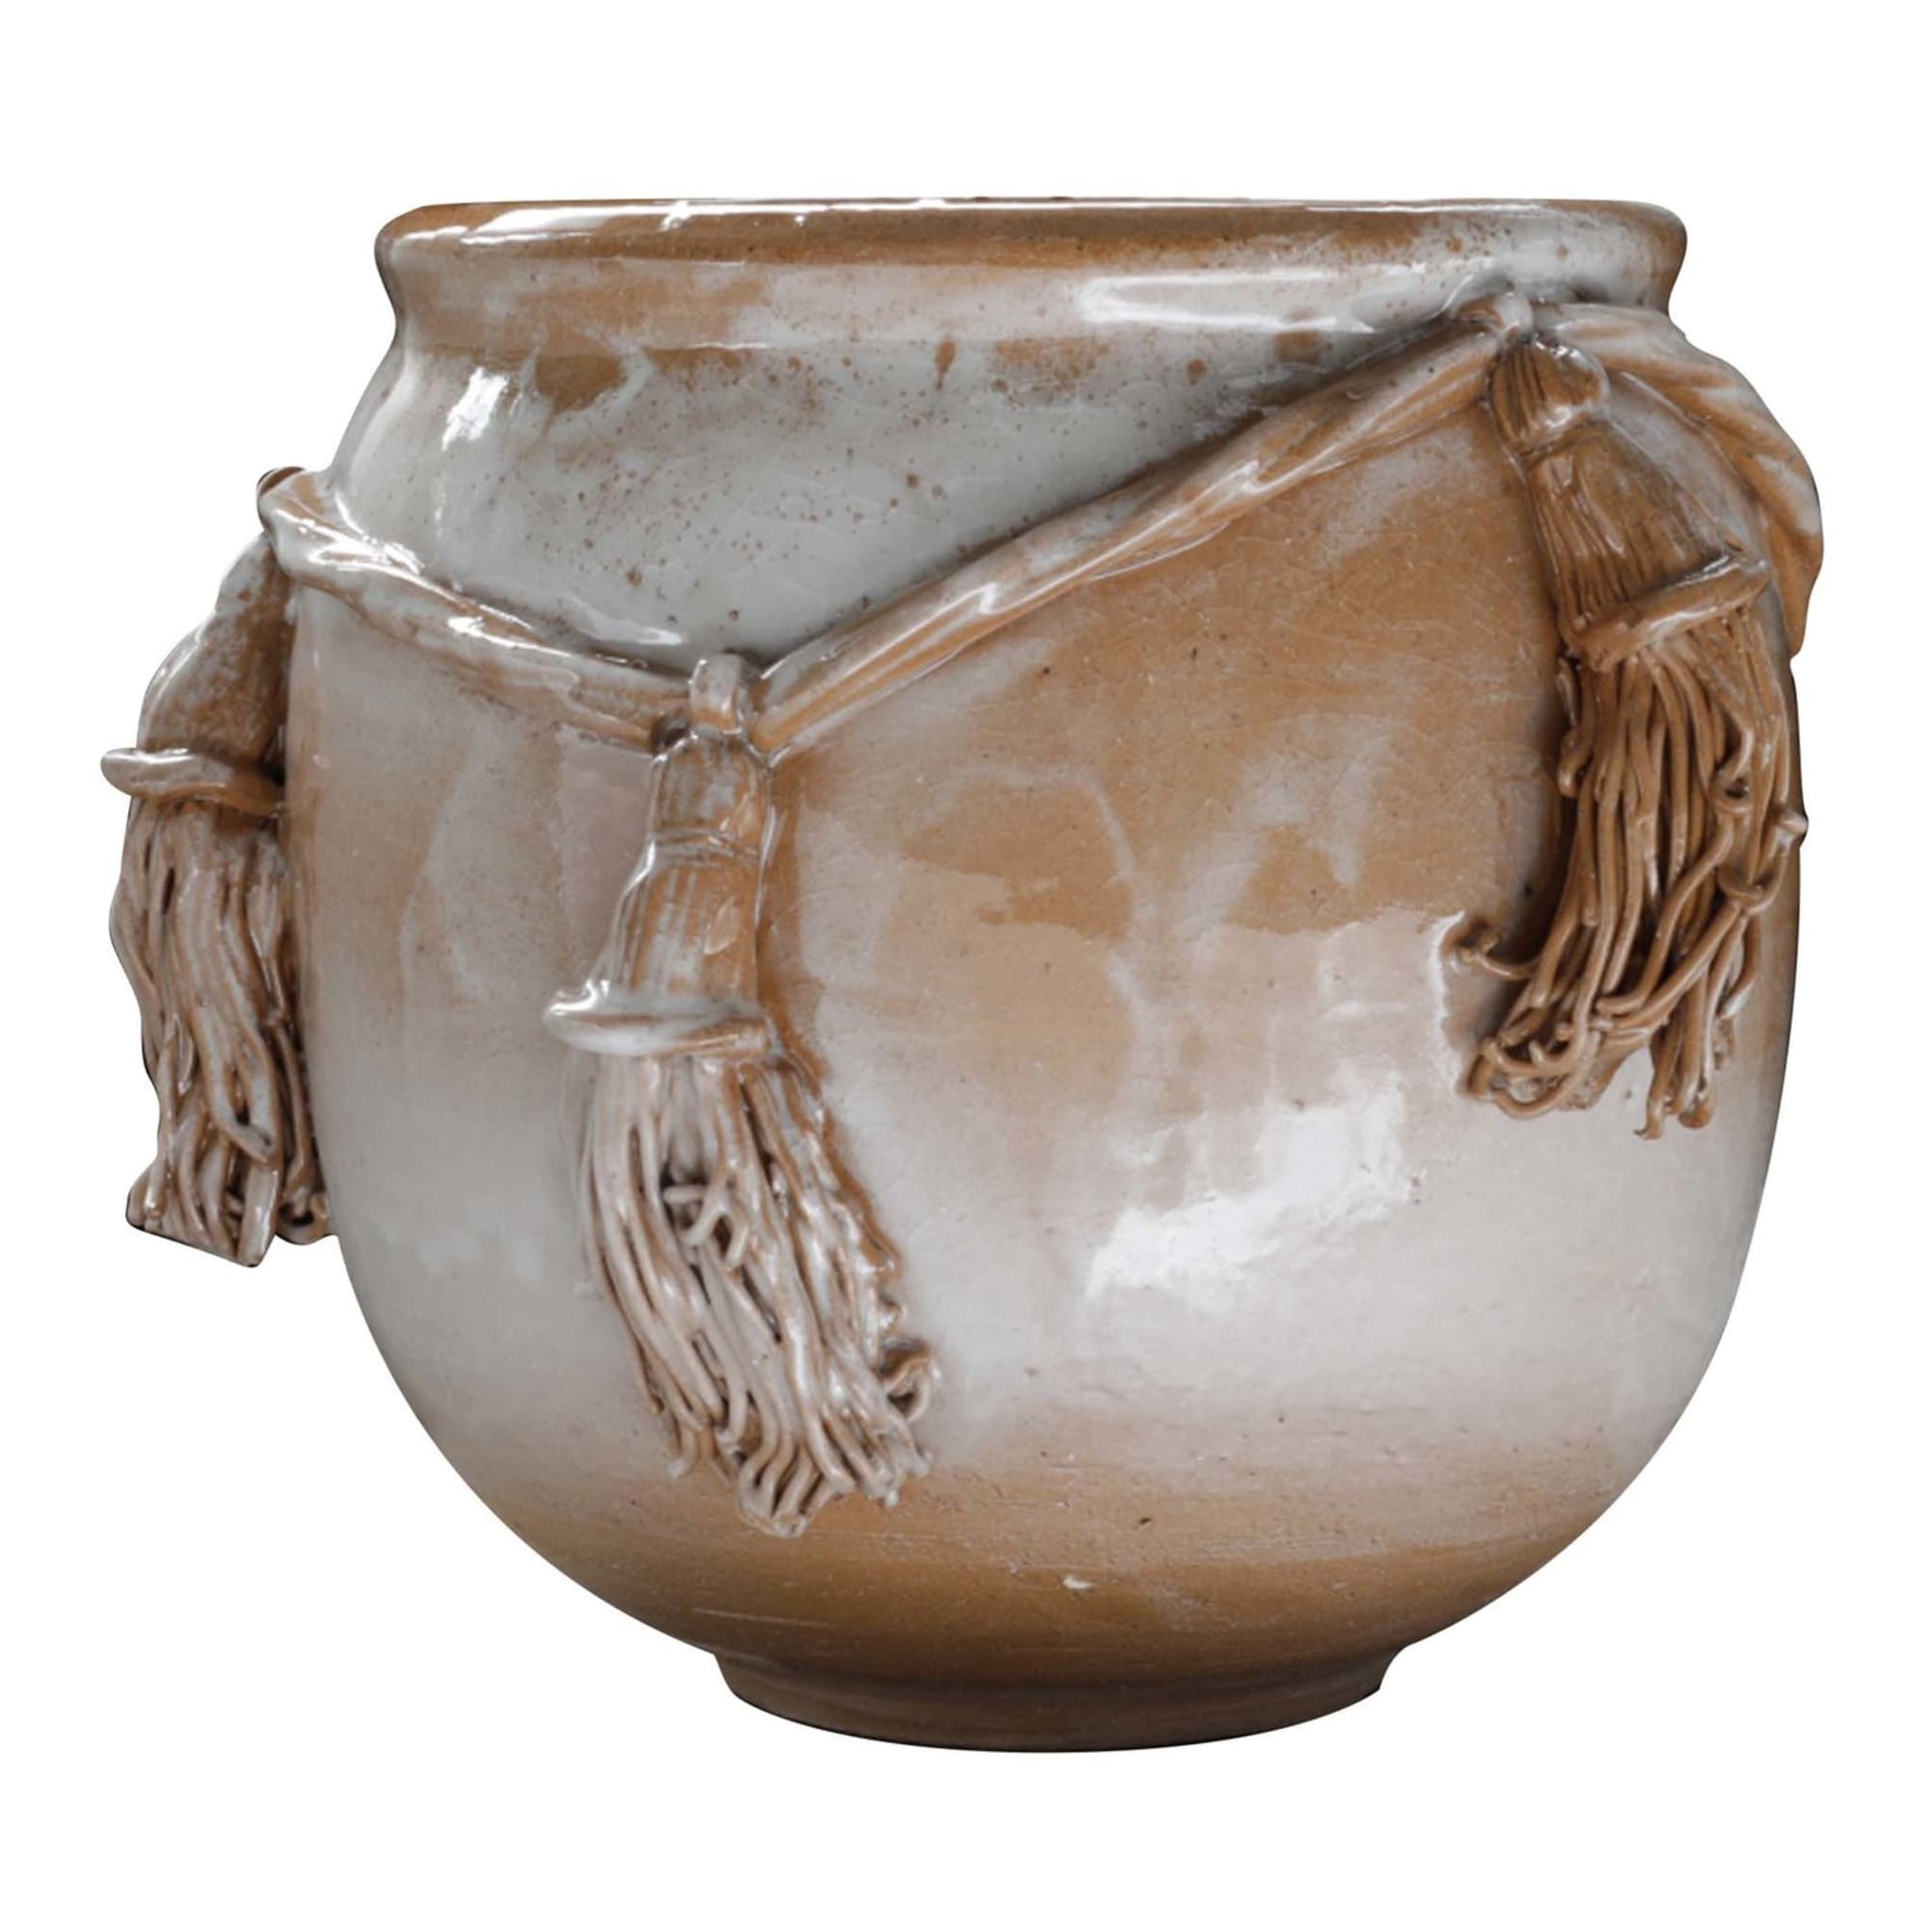 Vase With Tassels #2 - Main view